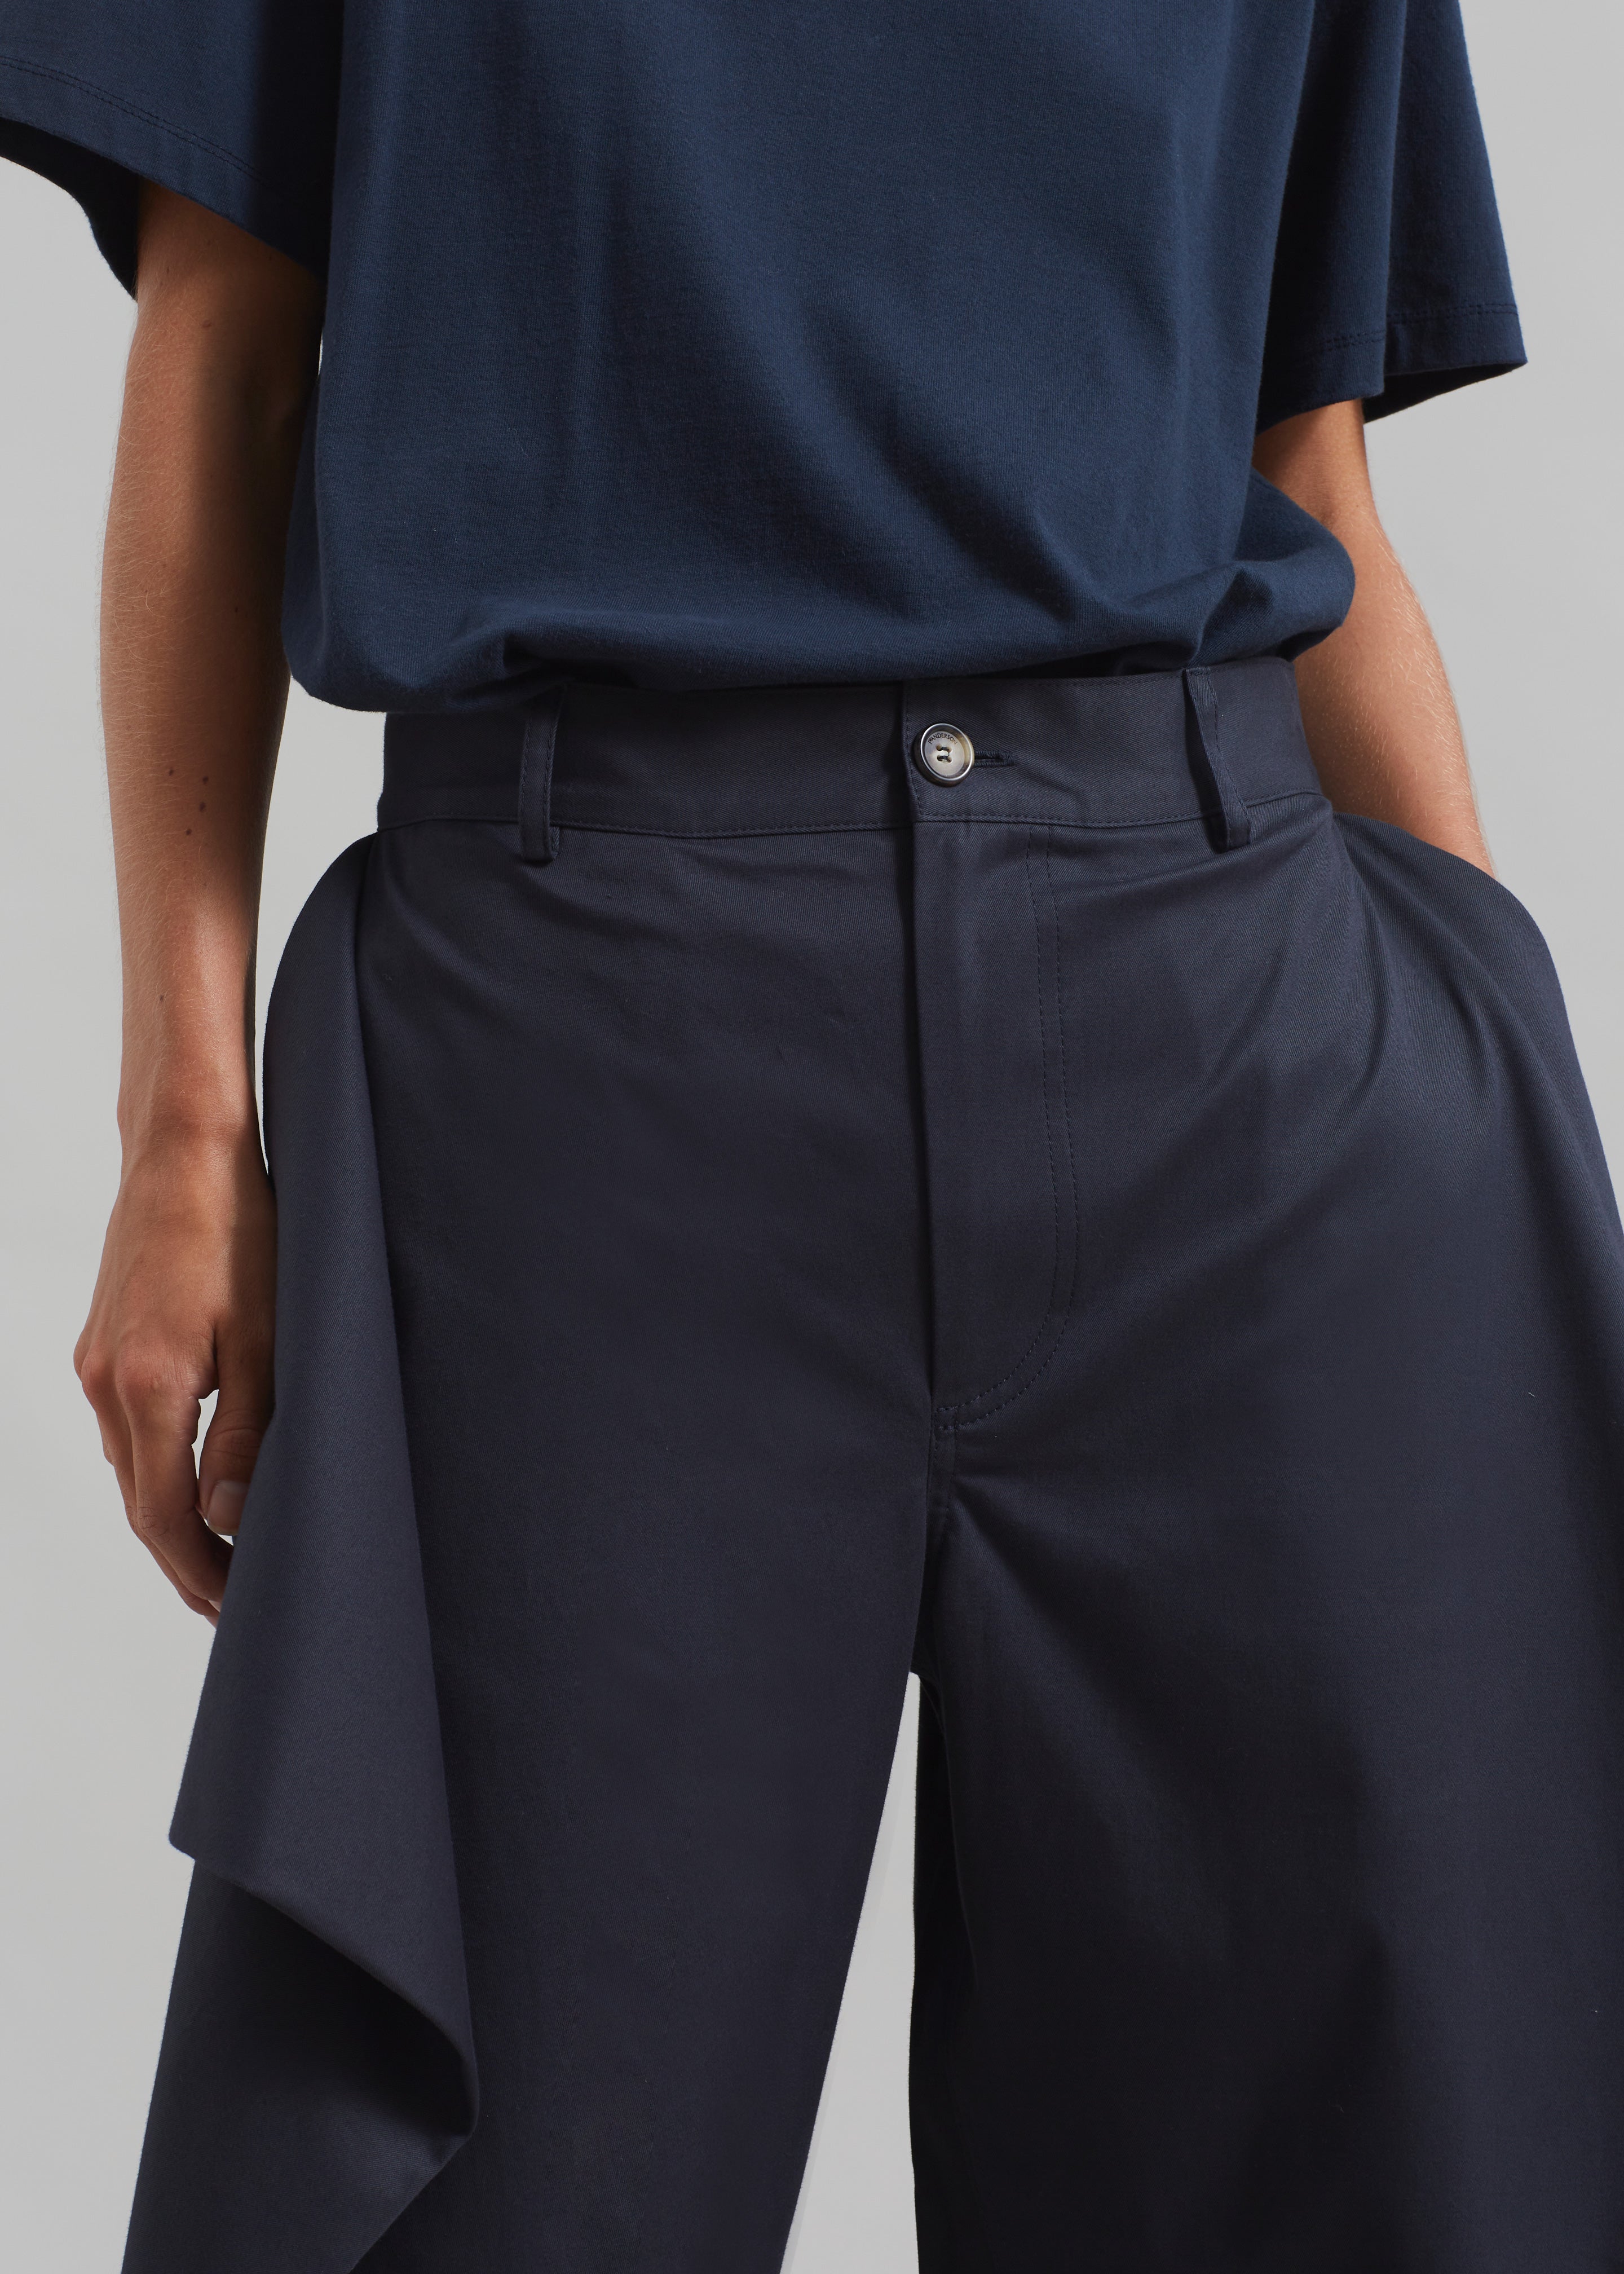 JW Anderson Kite Trousers - Navy - 3